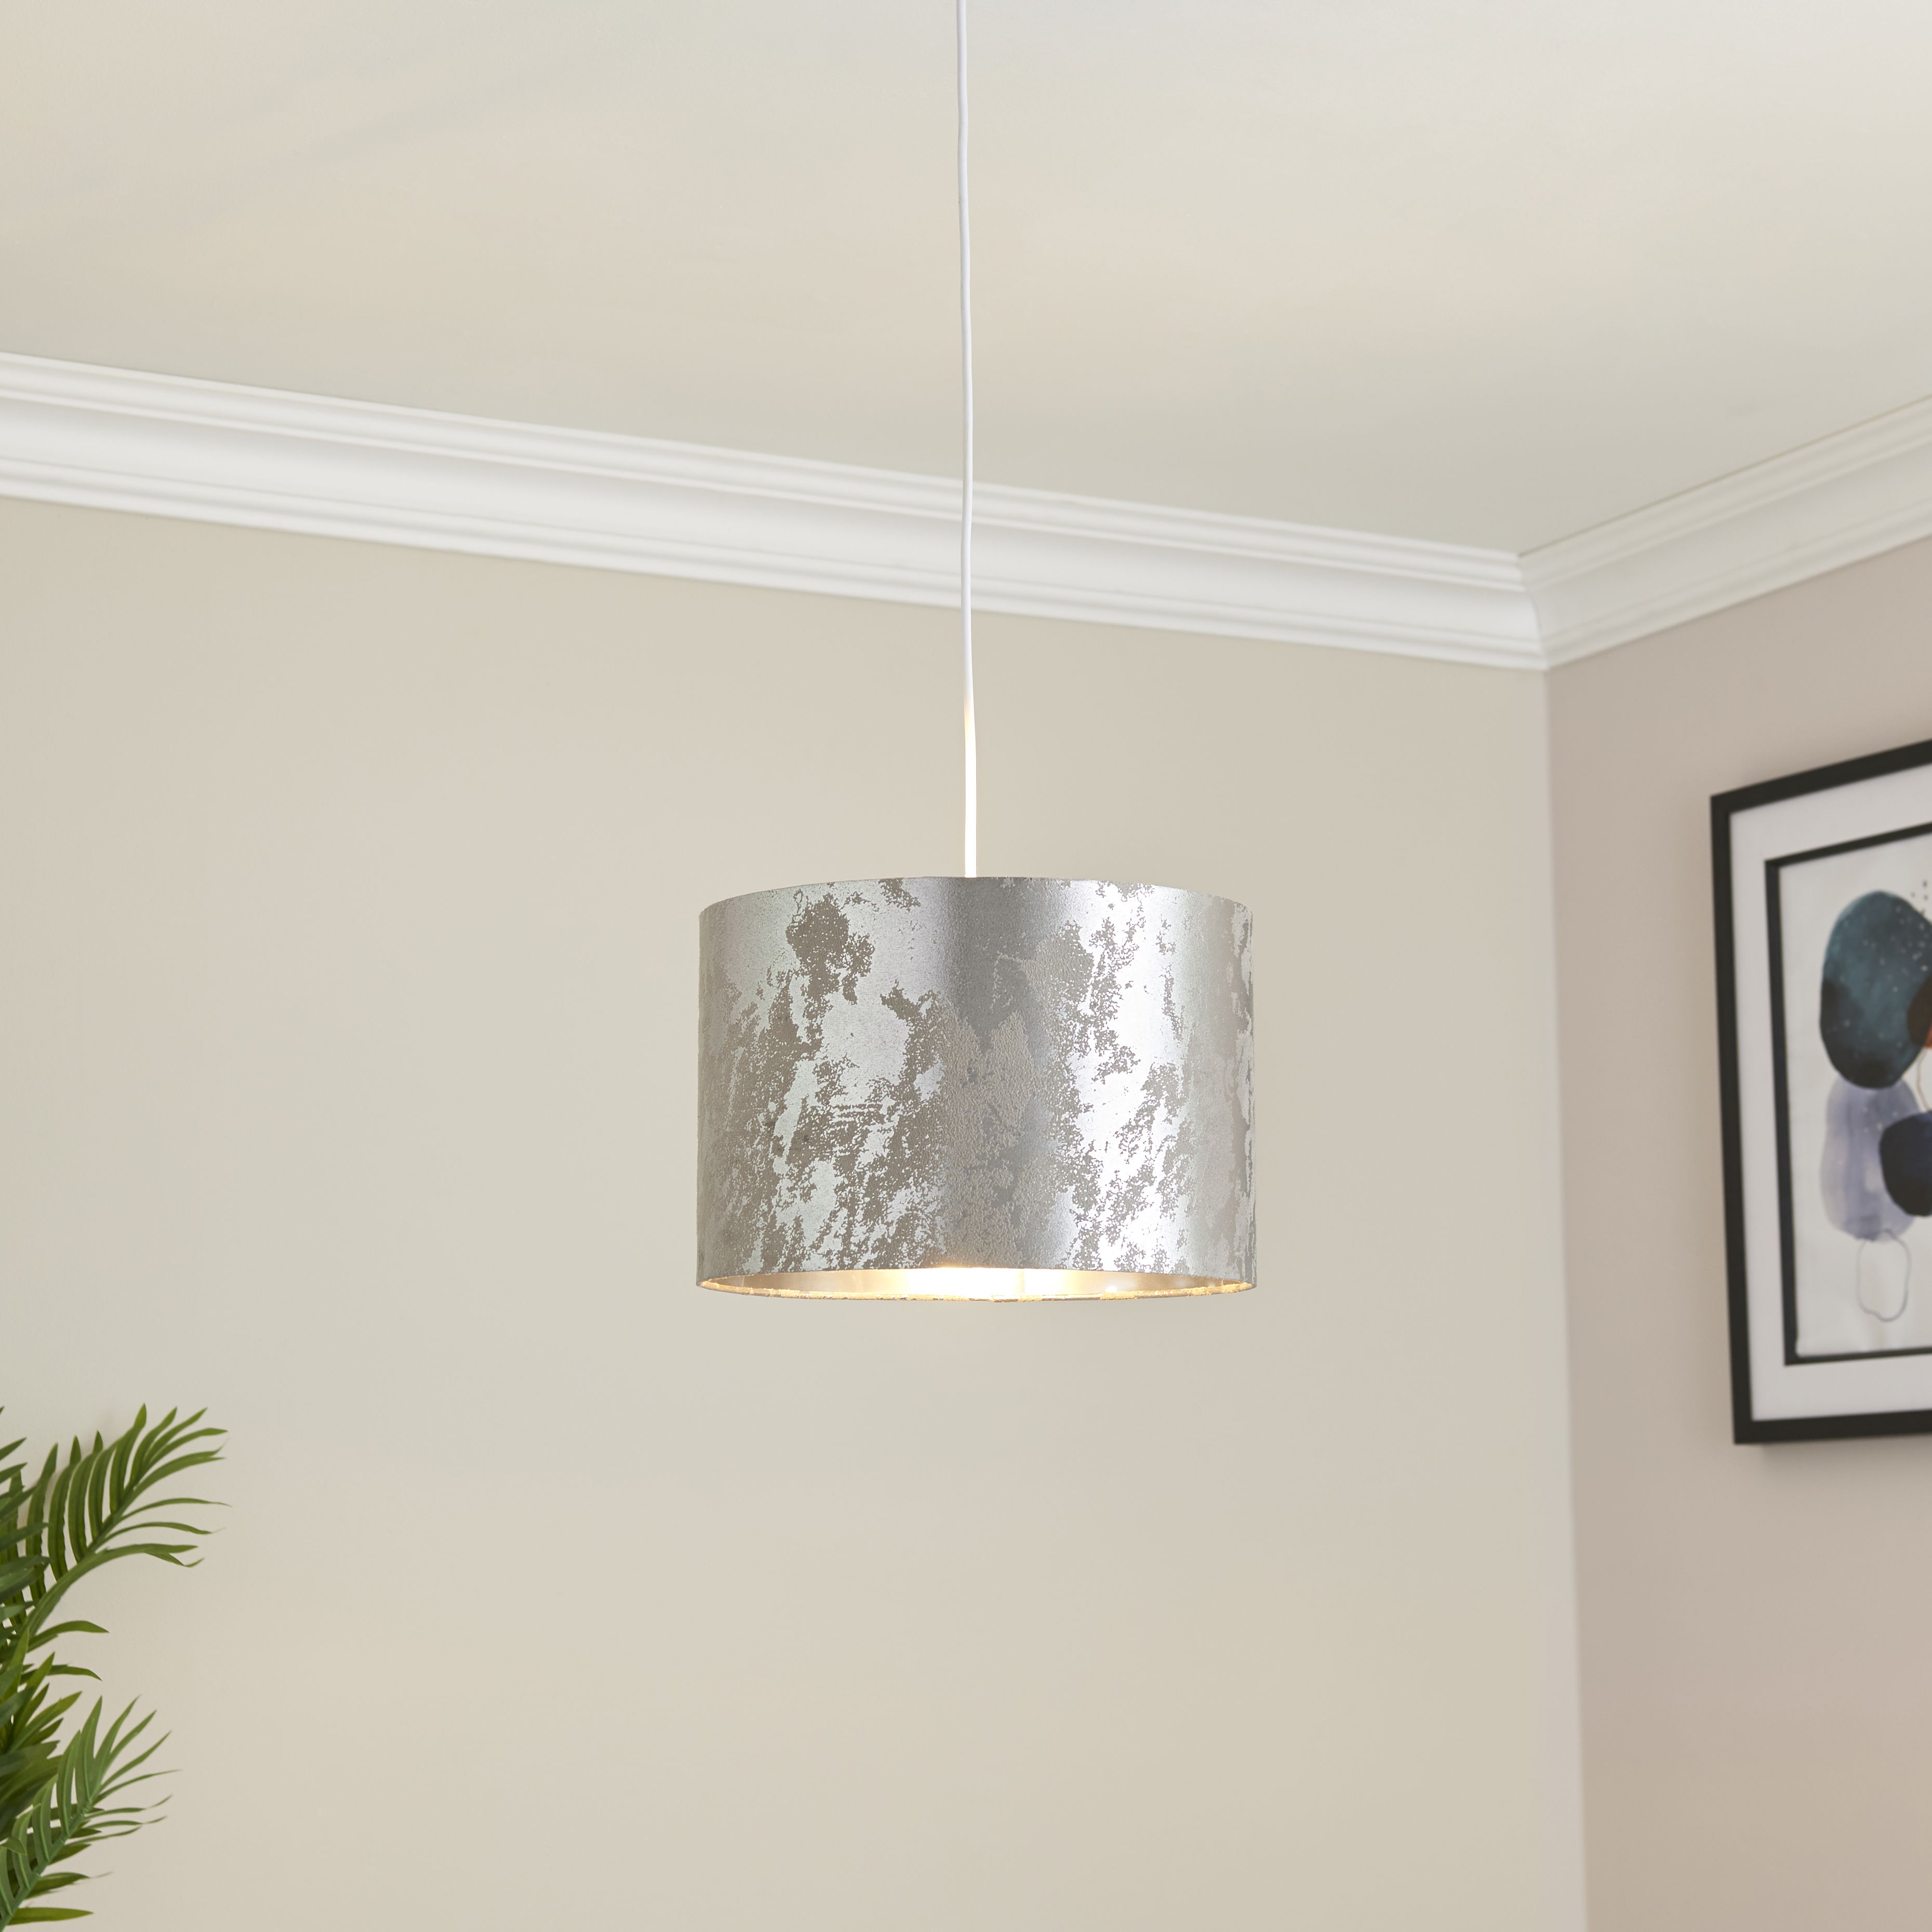 Oraco Brushed Silver effect Distressed Light shade (D)30cm